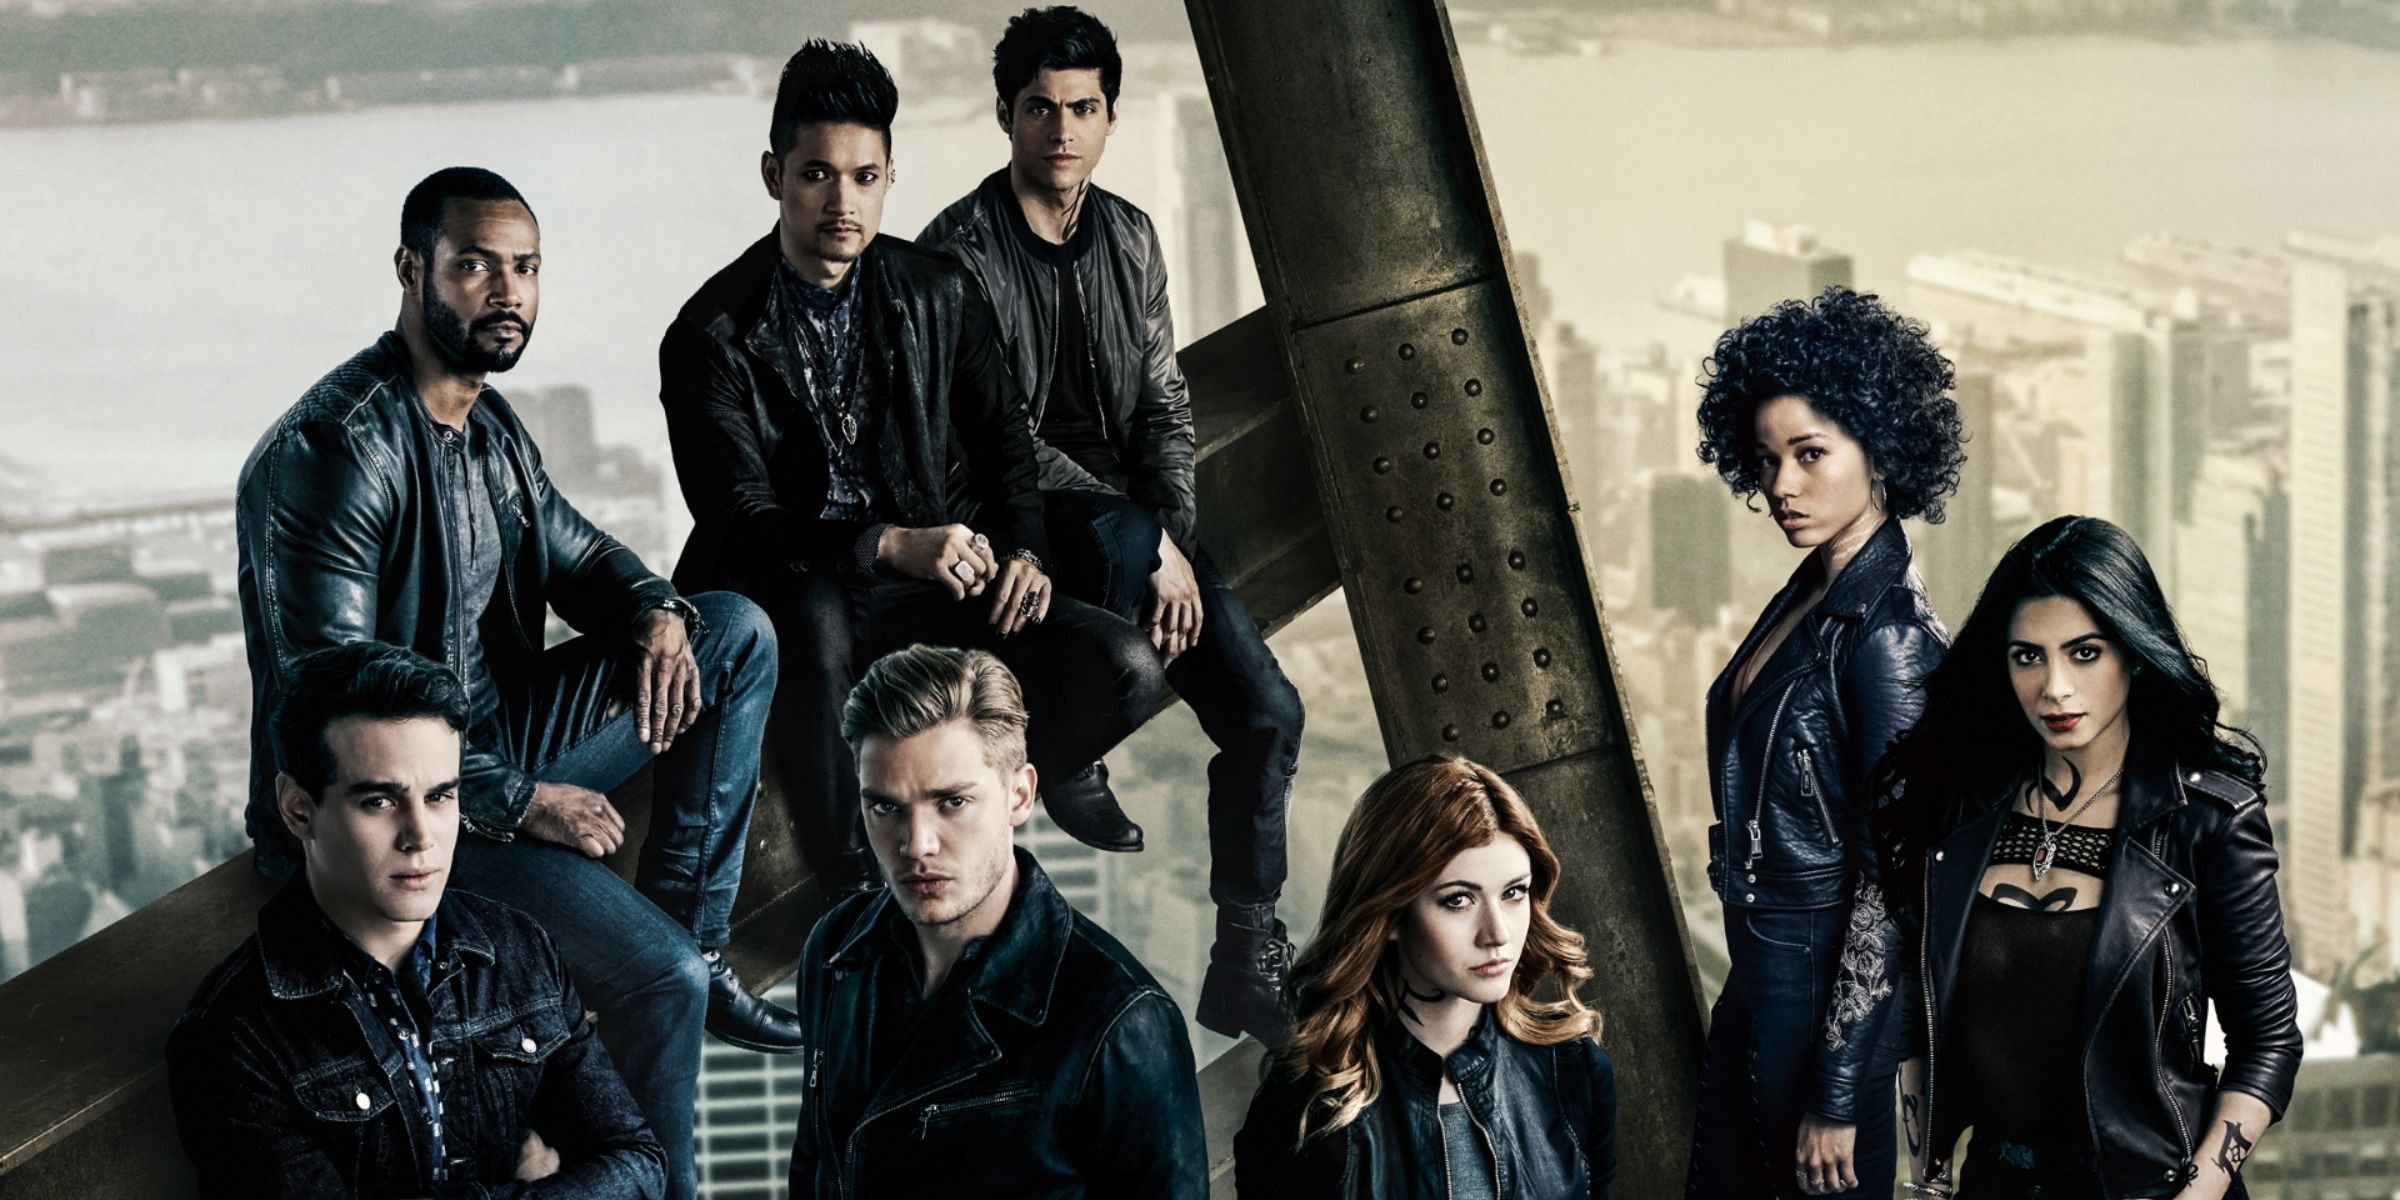 The cast of Shadowhunters in a promo image for the show